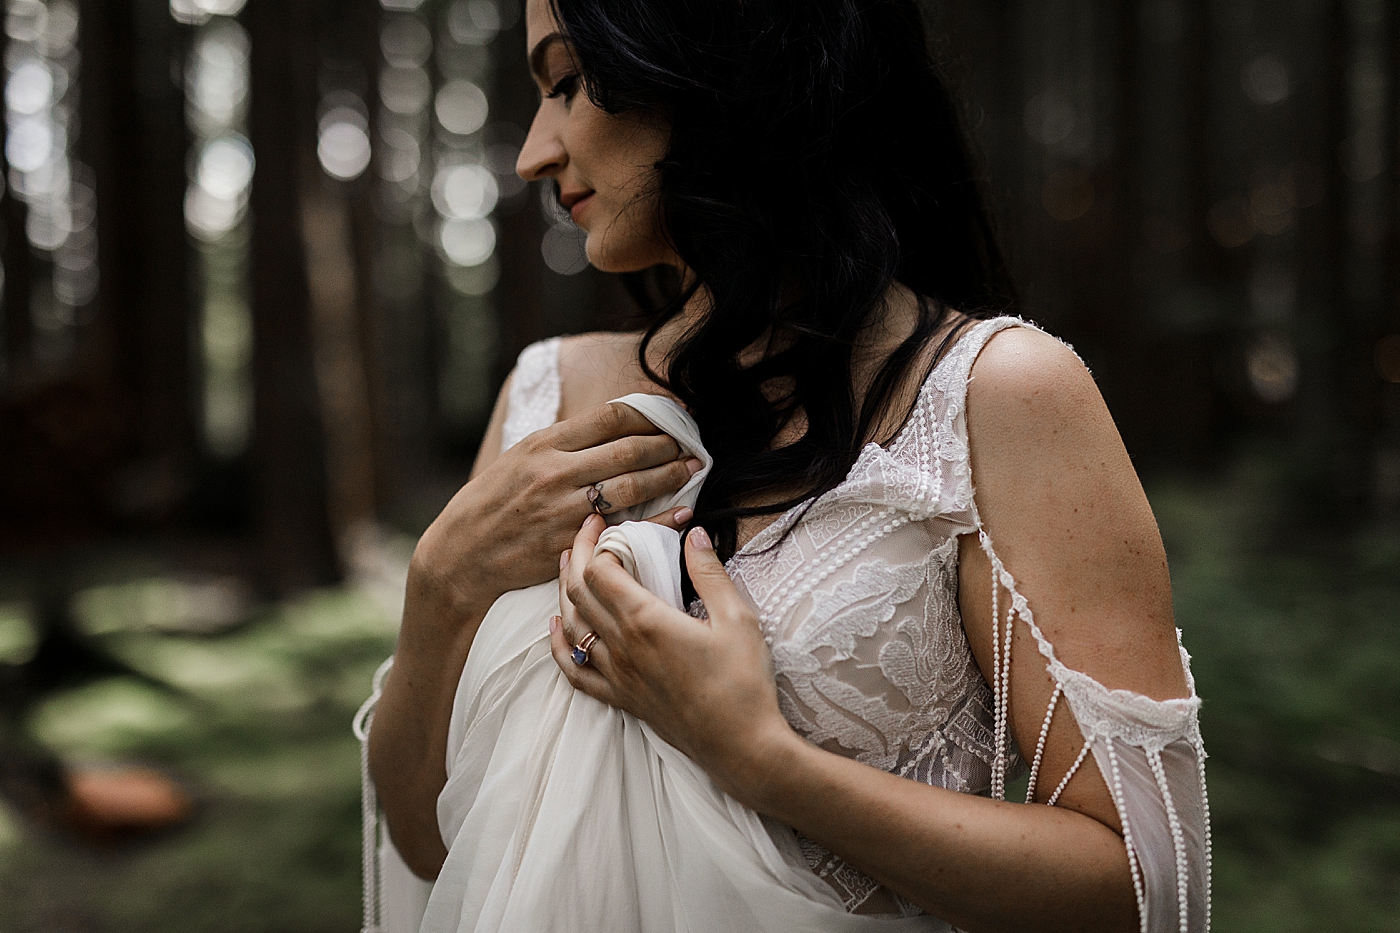 Bride in Daci Wedding Gown | Photographed by PNW Elopement Photographer, Megan Montalvo Photography.